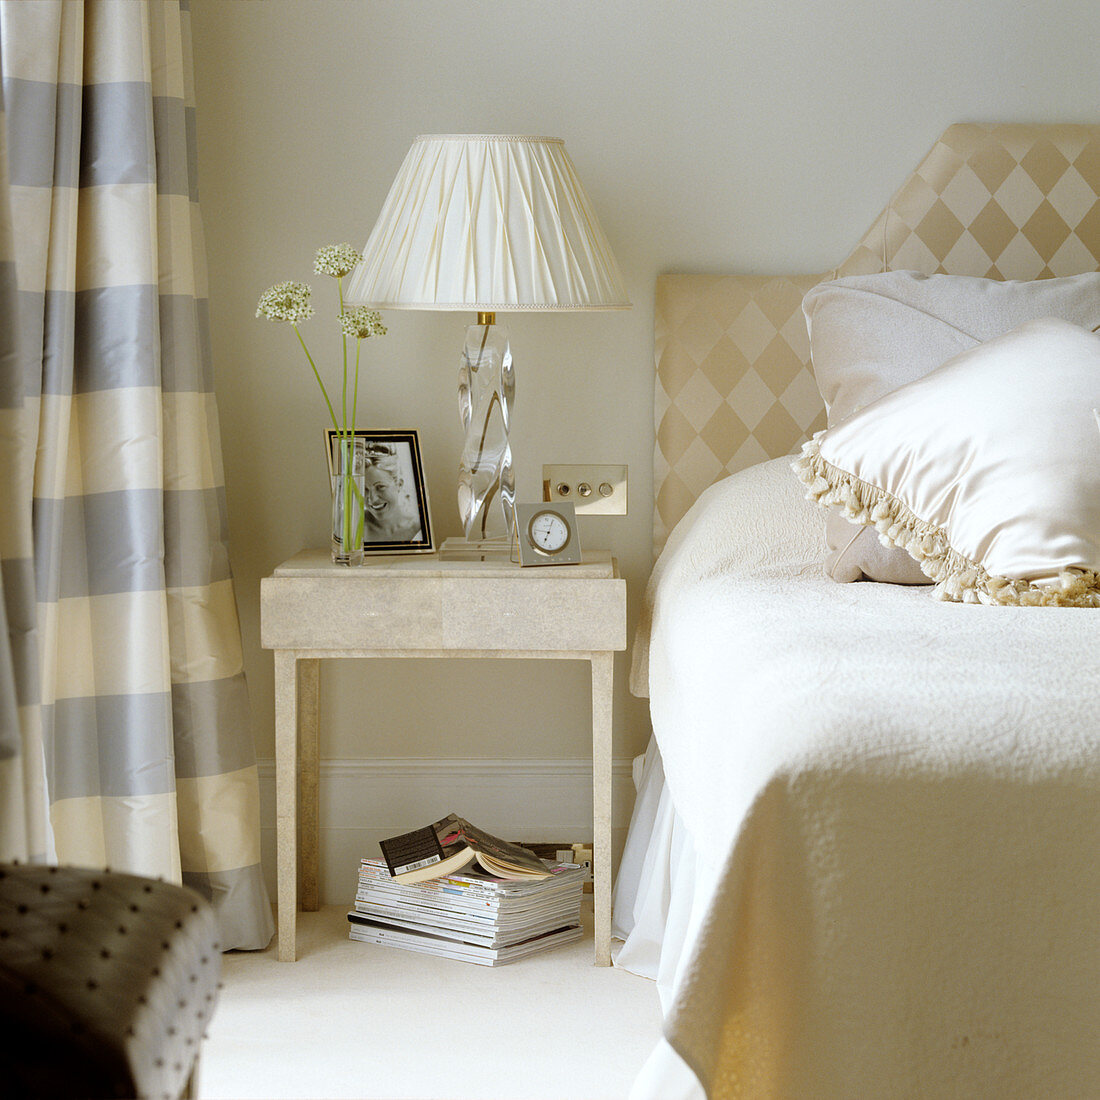 Table lamp with white fabric shade on pale side table next to bed with upholstered headboard on wall